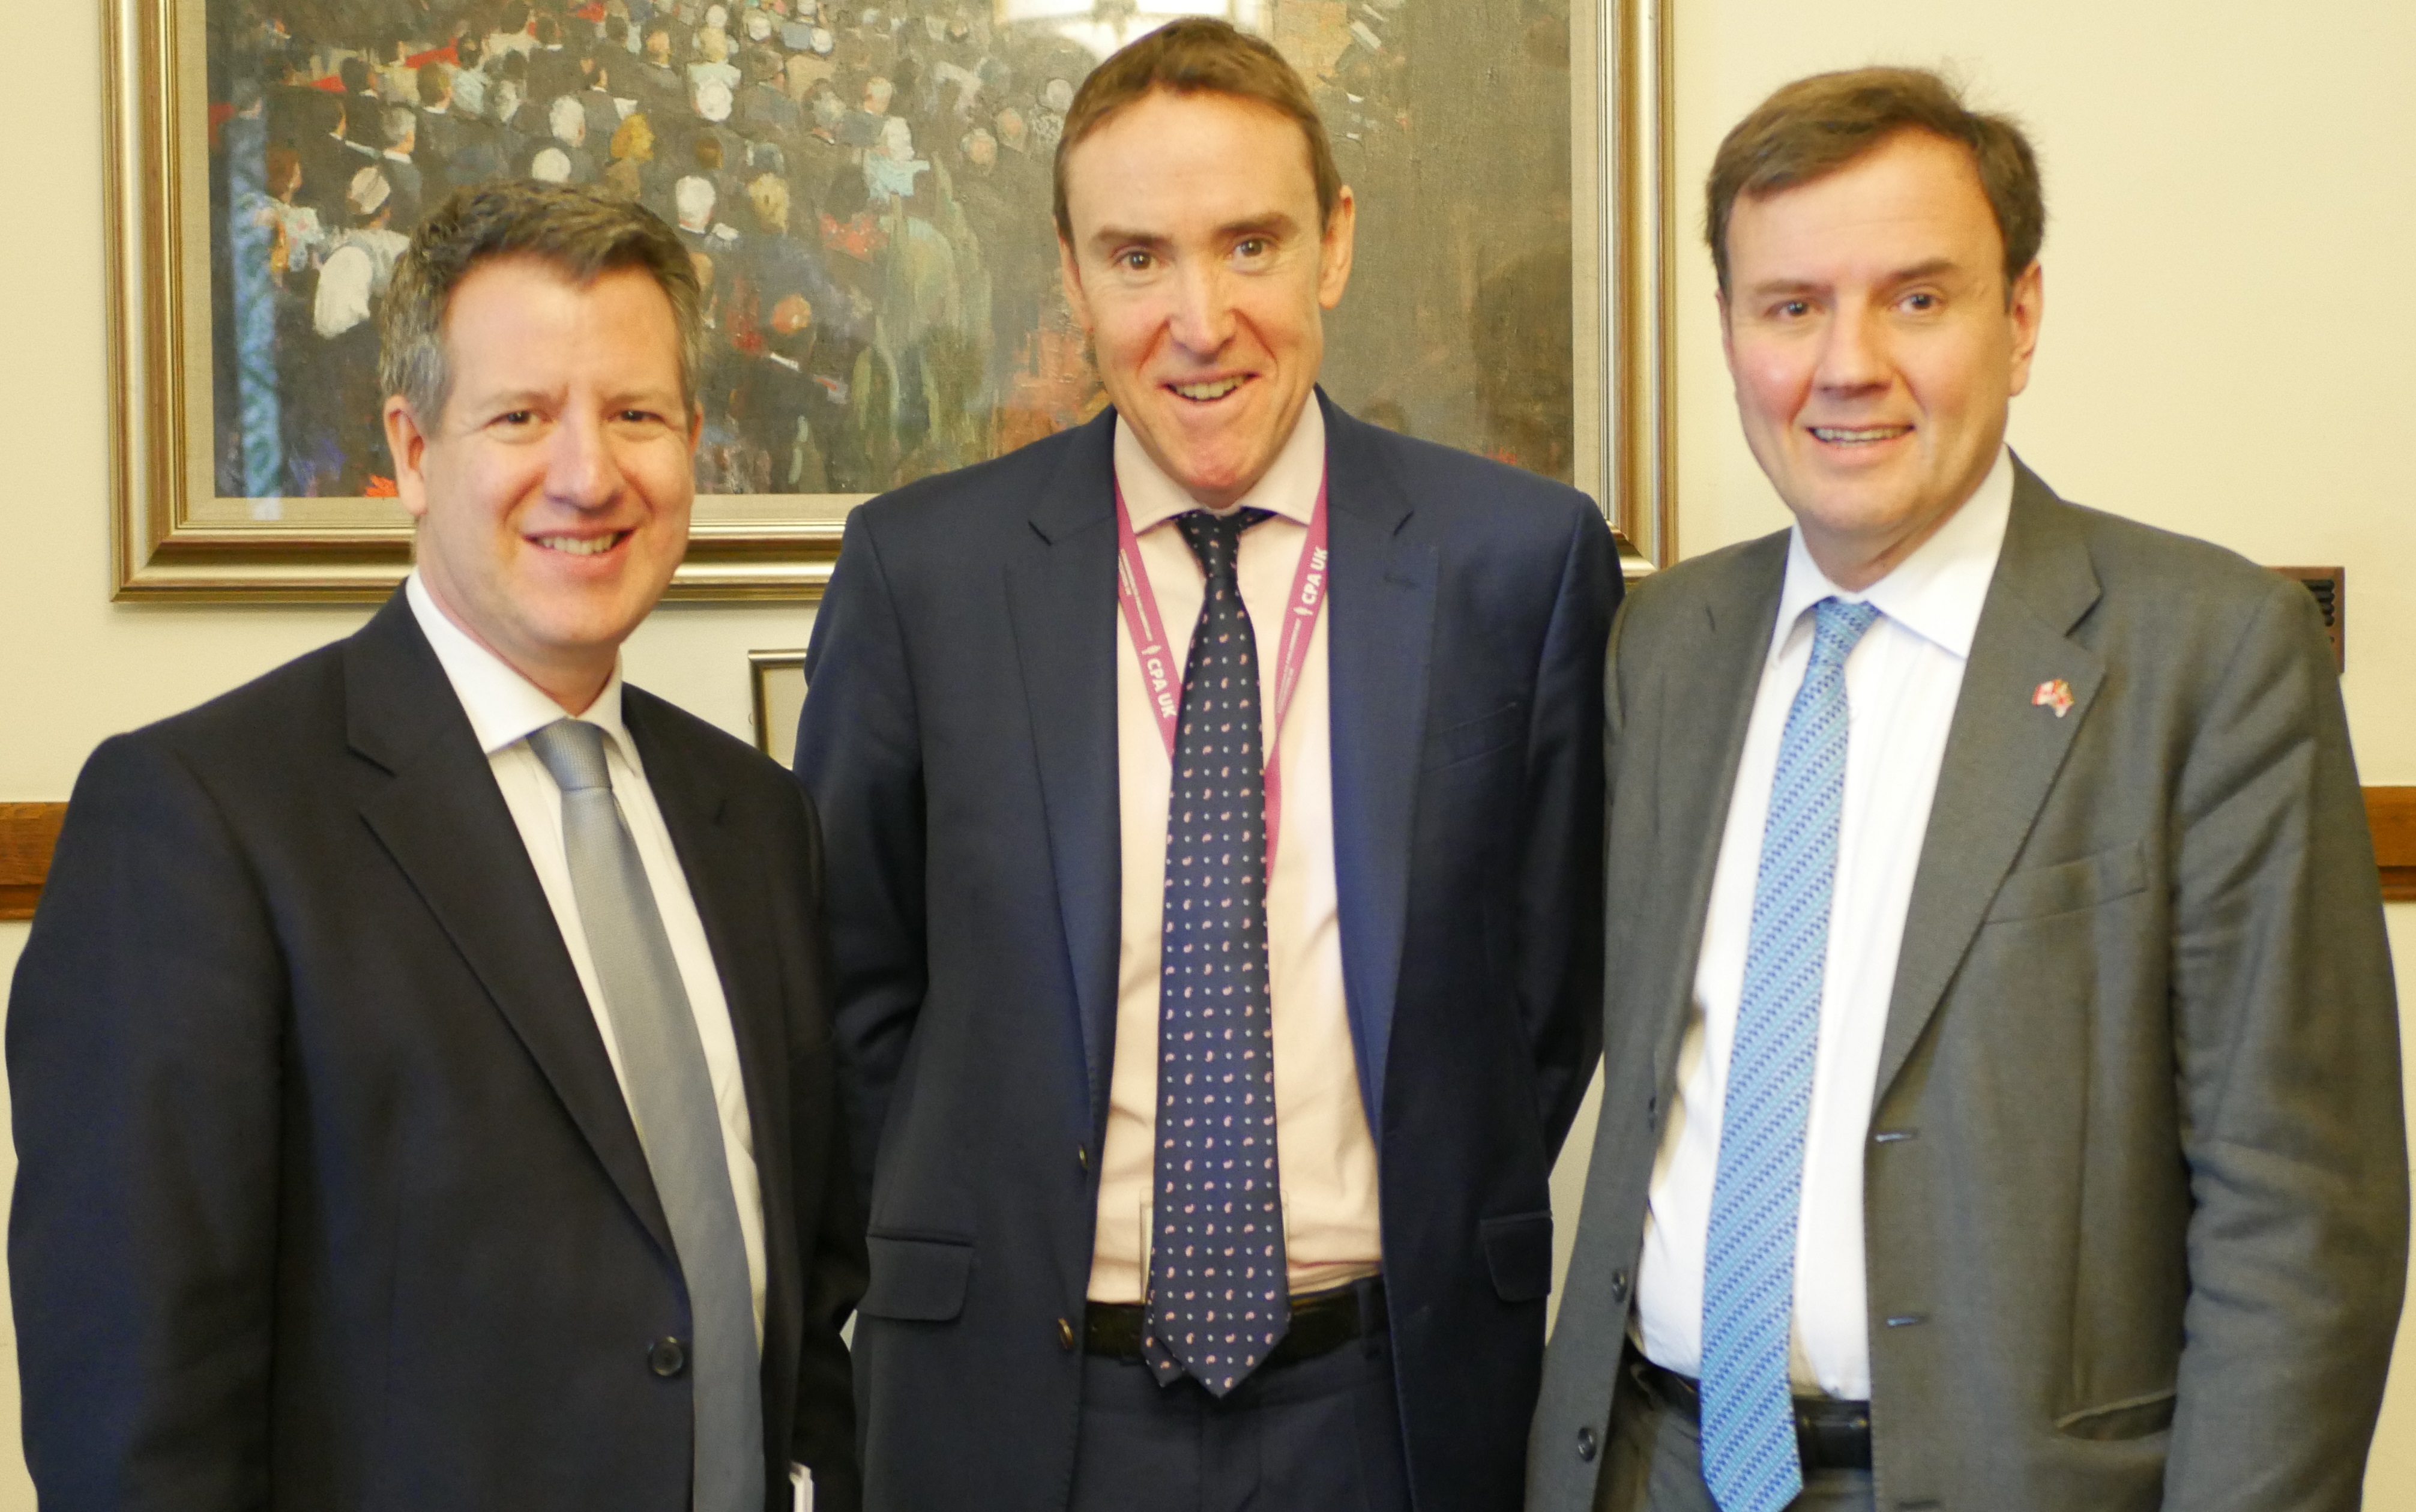 Jon Davies, CEO of CPA UK, with Chris Leslie MP and Greg Hands MP